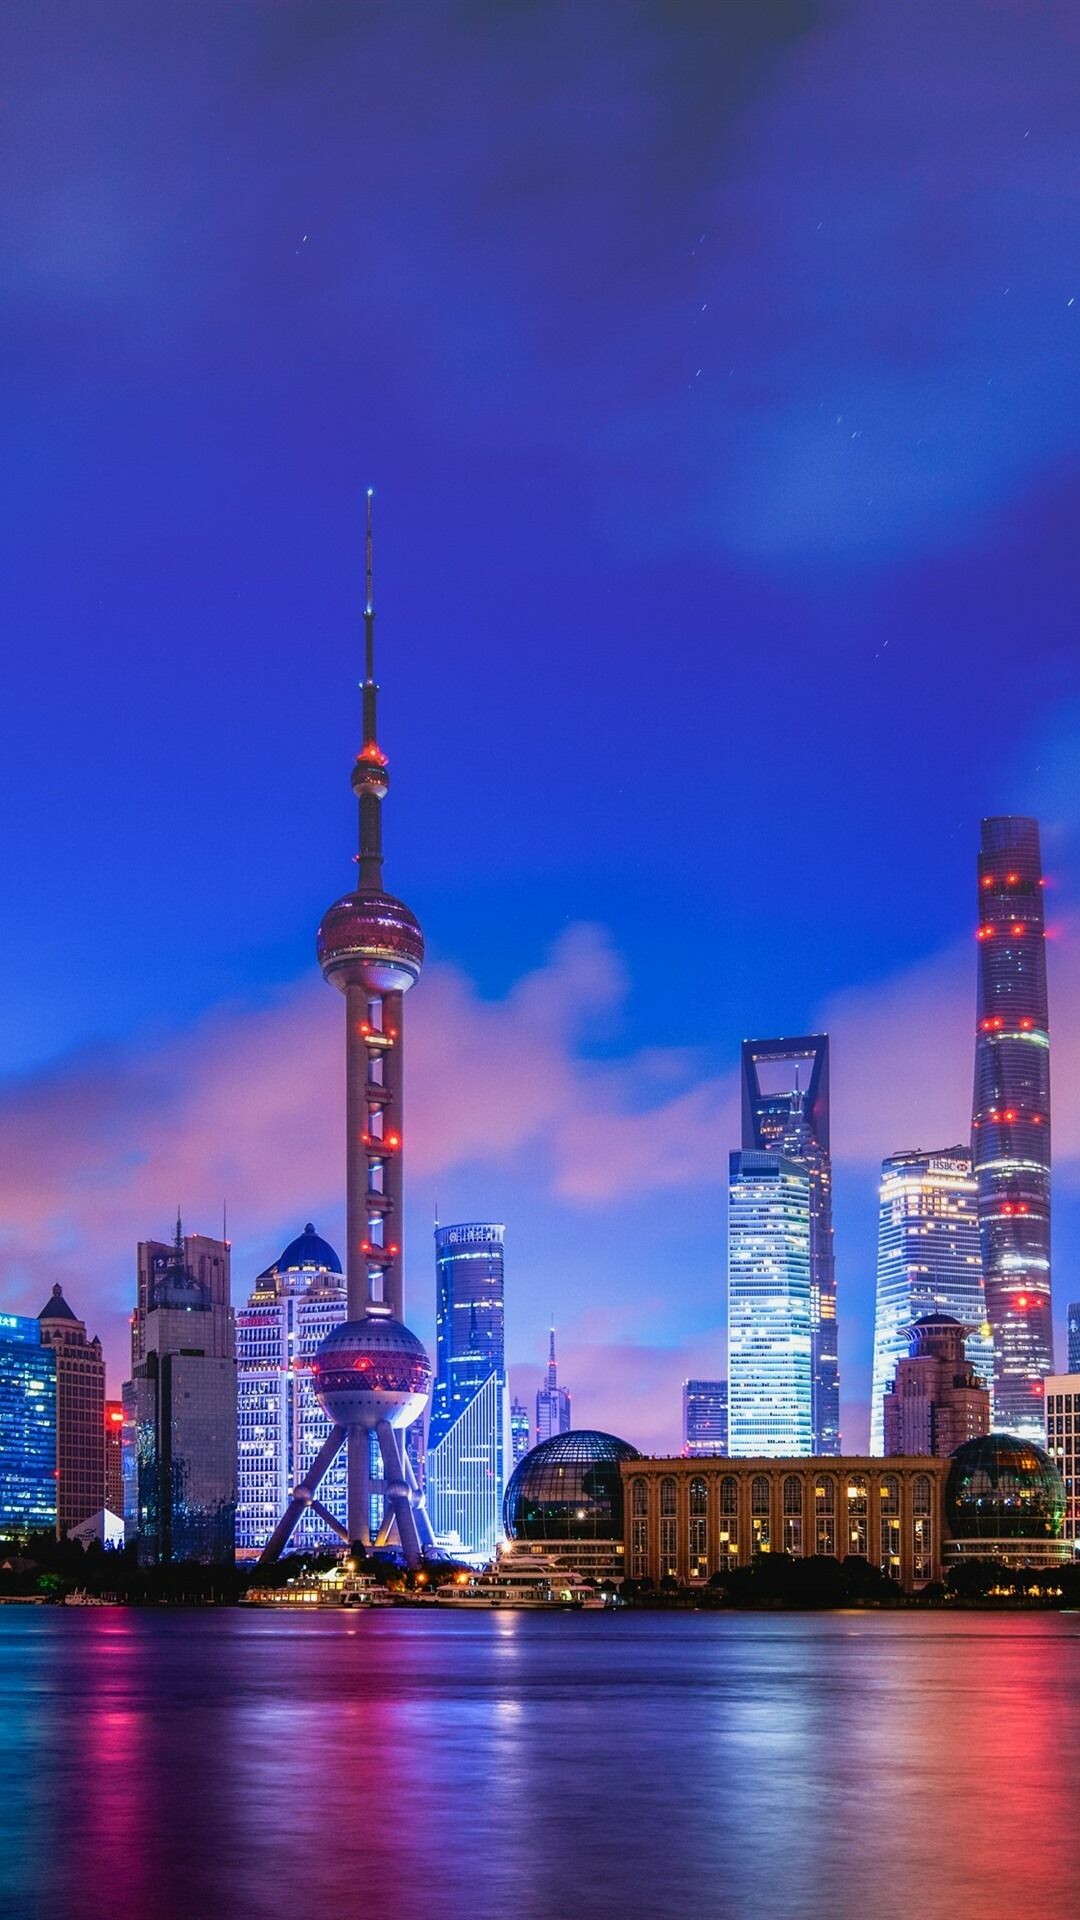 China: Pudong, A district of Shanghai located east of the Huang. 1080x1920 Full HD Wallpaper.